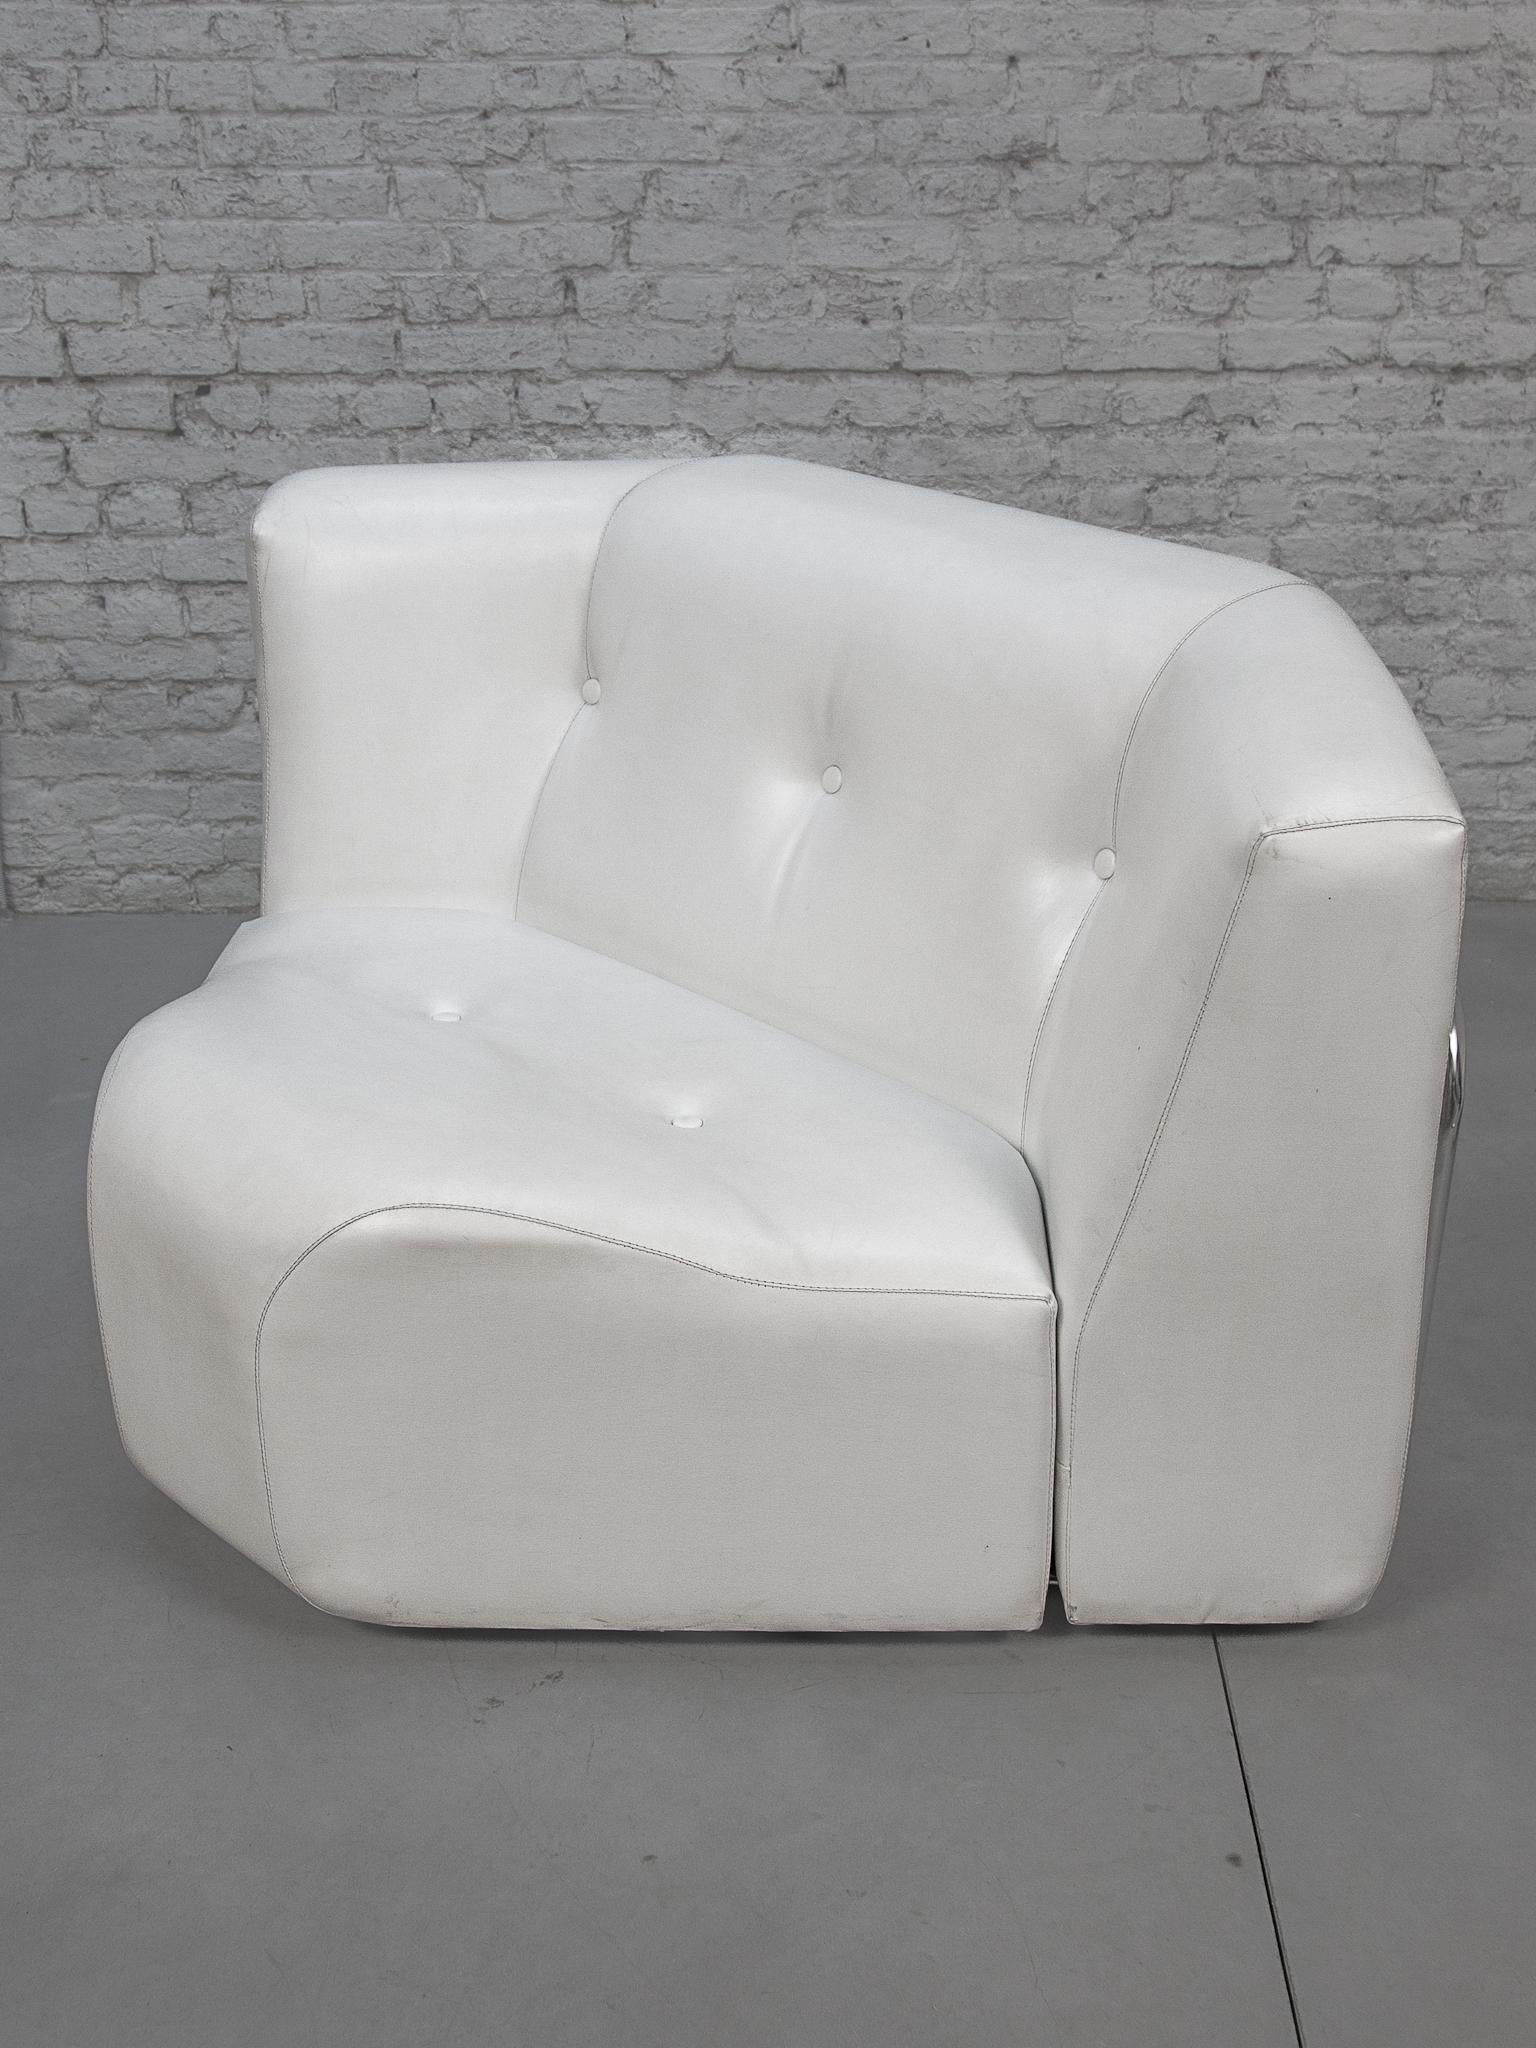 White and Chrome Livingroom set of Adriano Piazzesi Lounge Chairs and Footstools For Sale 4